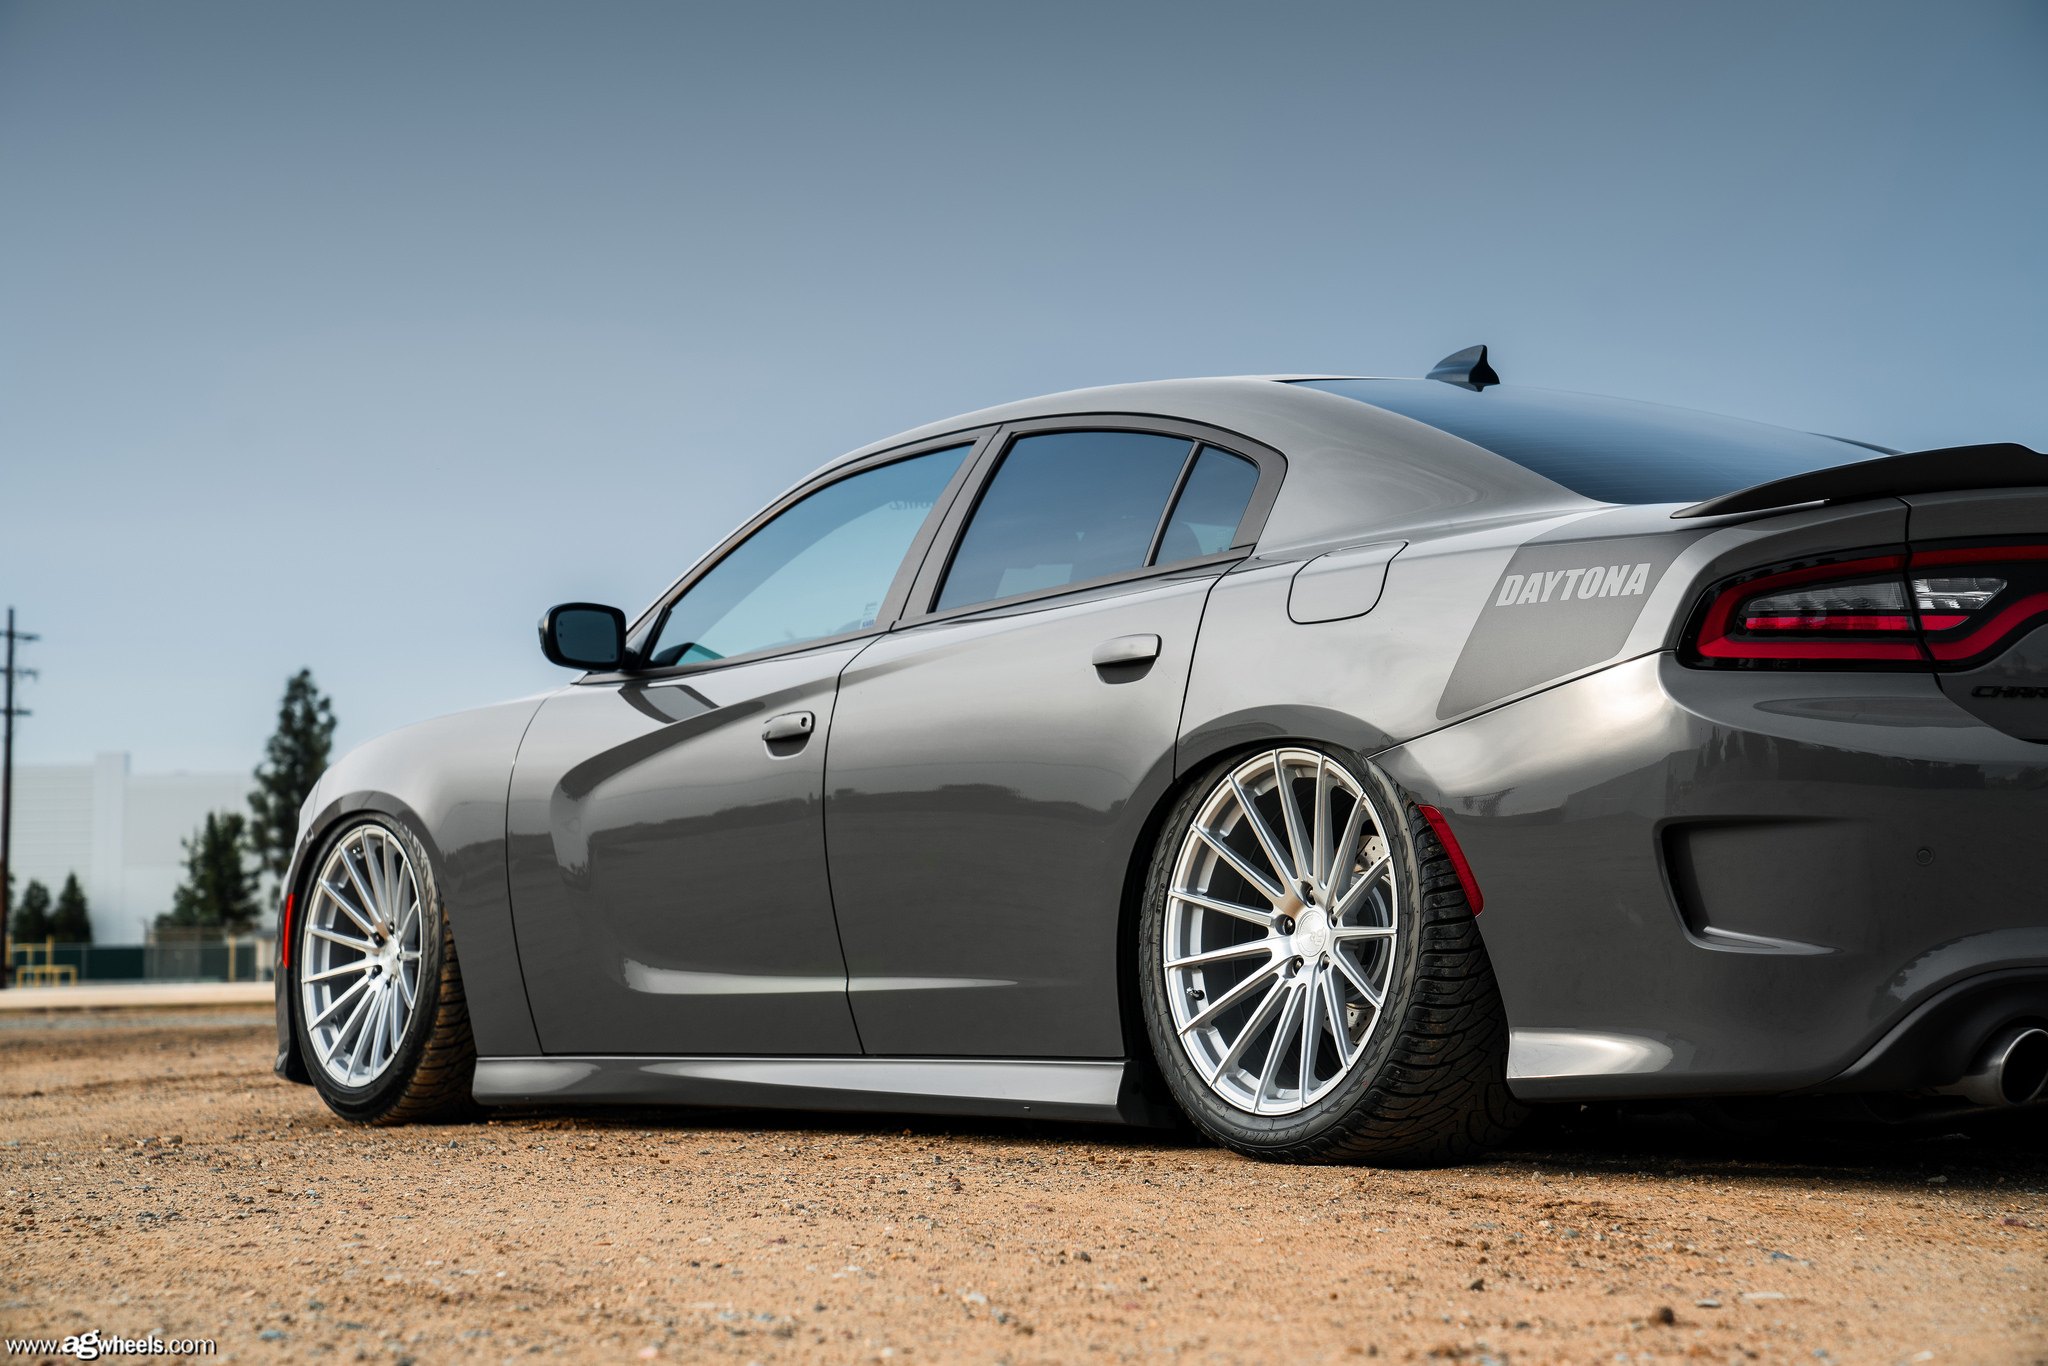 Gray Dodge Charger with Aftermarket Rear Diffuser - Photo by Avant Garde Wheels